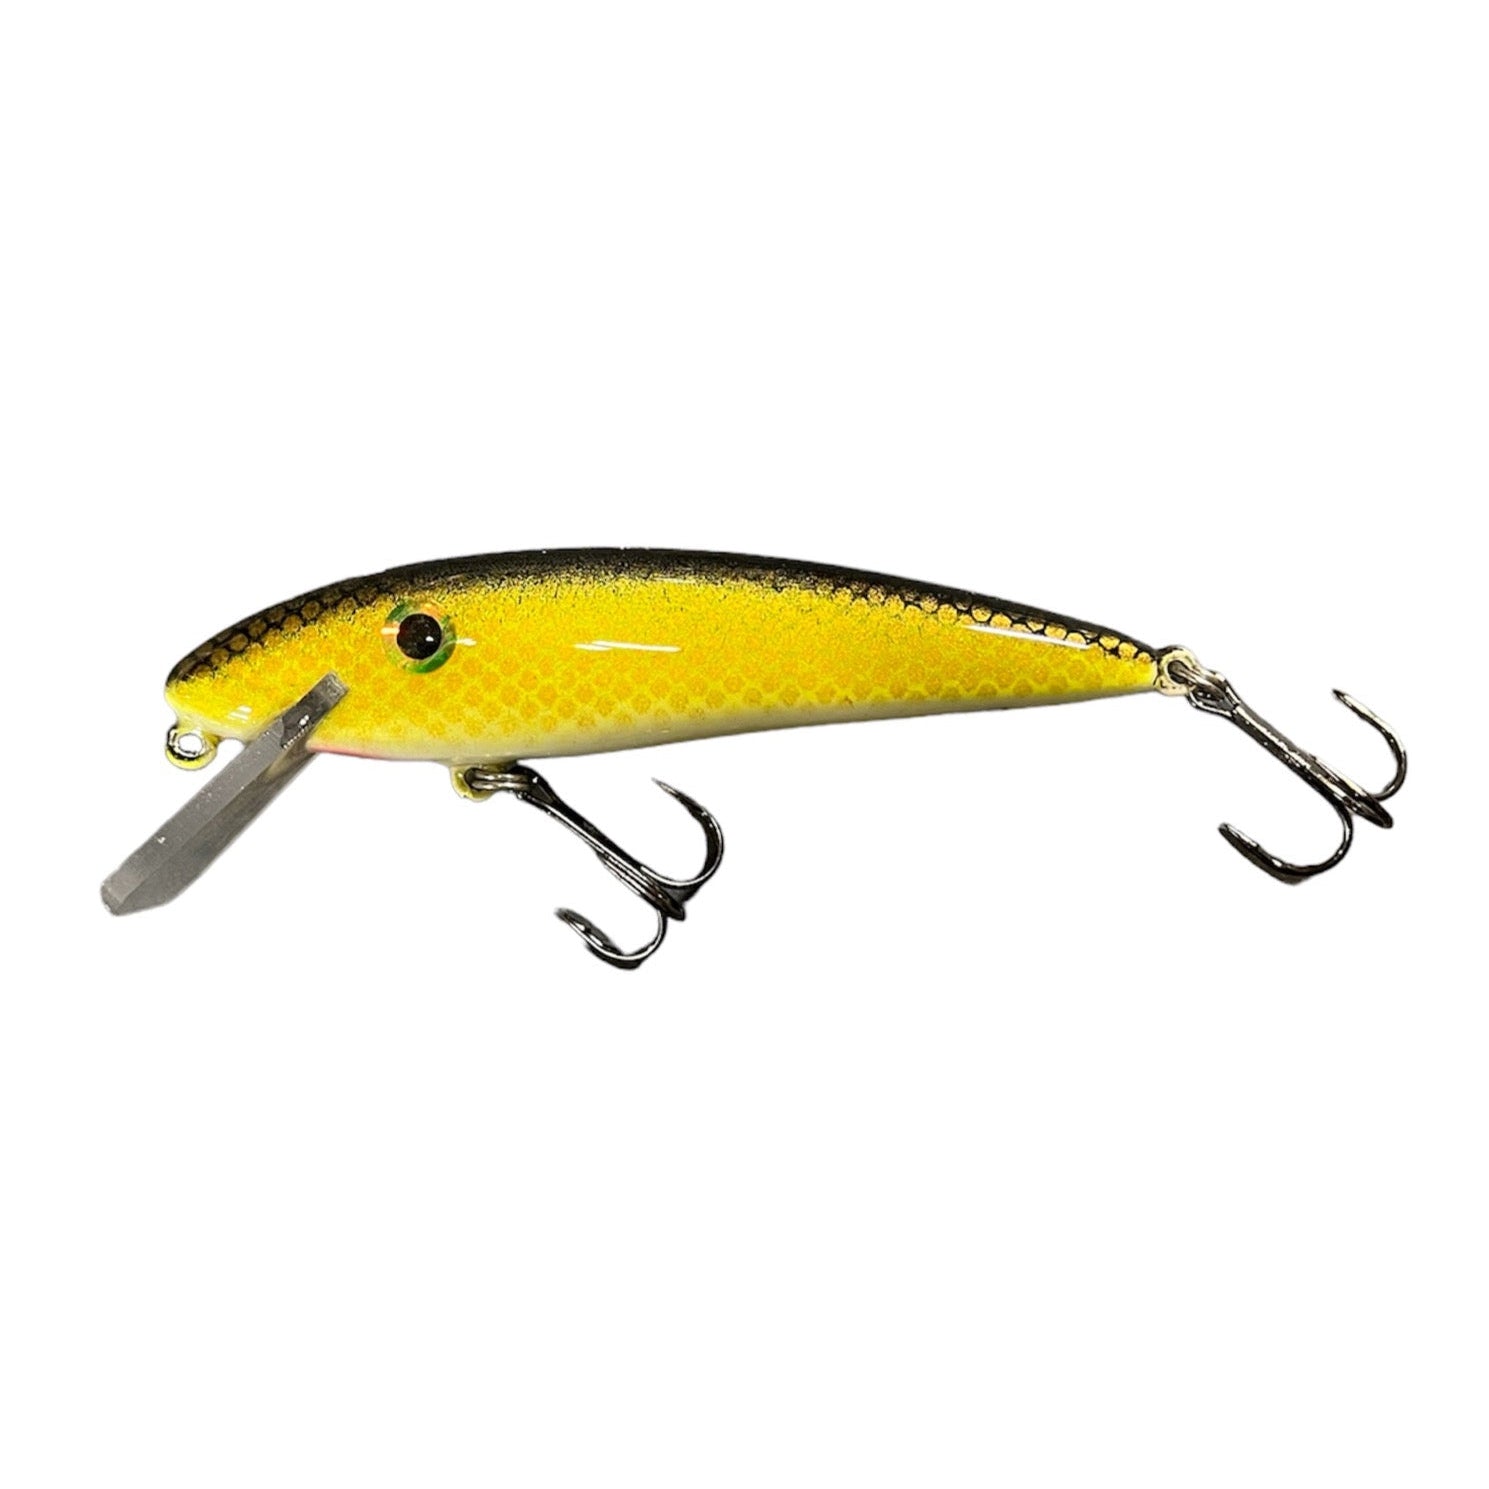 View of Crankbaits Custom X Fury 6.5" Crankbait Chartreuse Sucker available at EZOKO Pike and Musky Shop